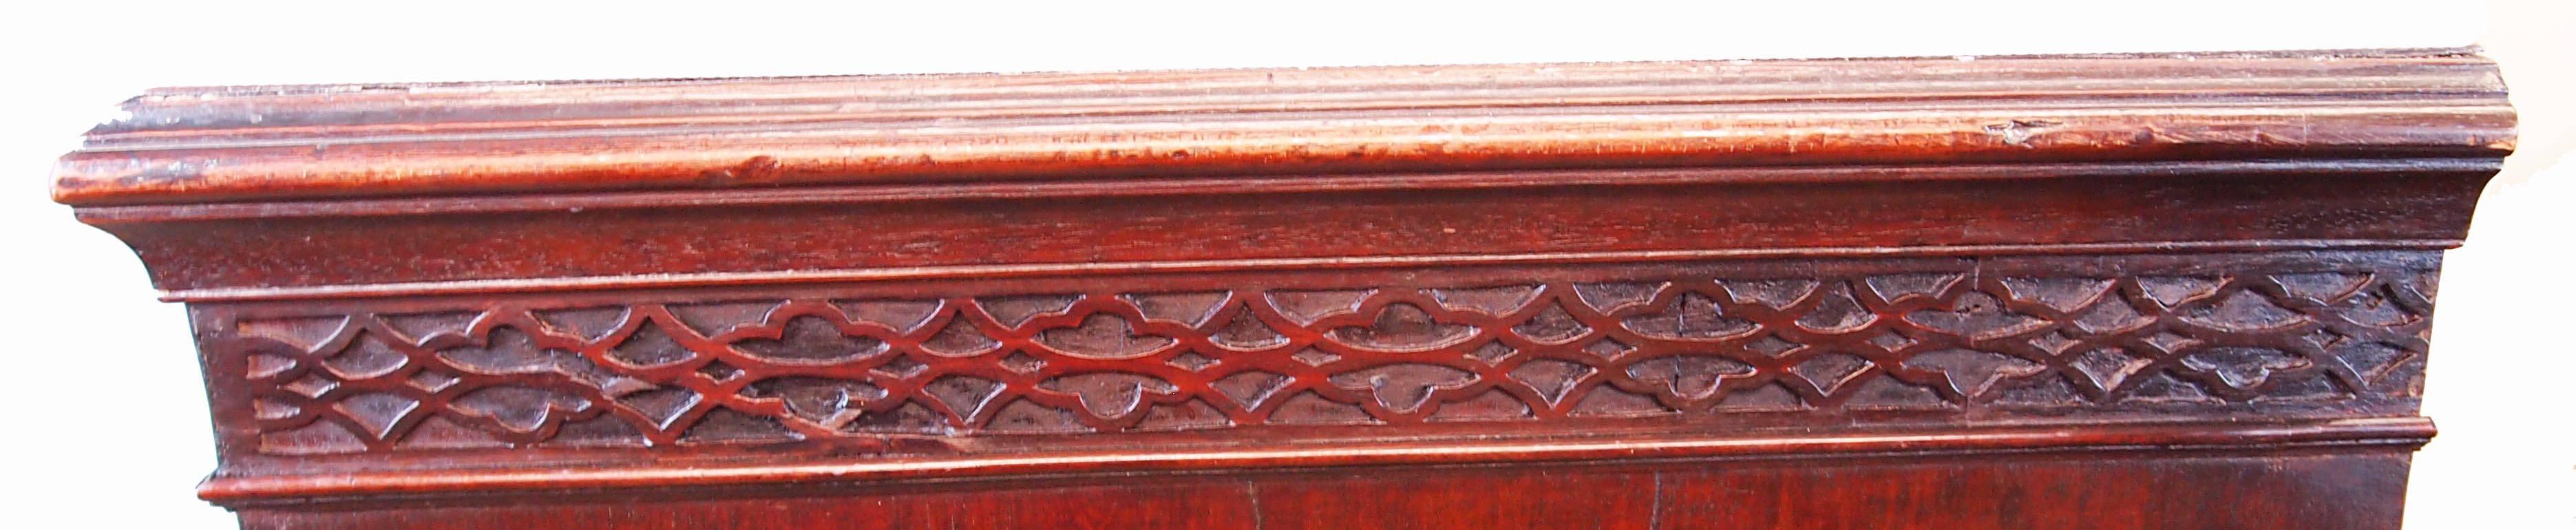 A delightful 18th century Chippendale Period mahogany chest of unusually
Large proportion having well figured top above blind fretwork frieze, two
short and five long drawers retaining original brass handles raised on
original ogee bracket feet.